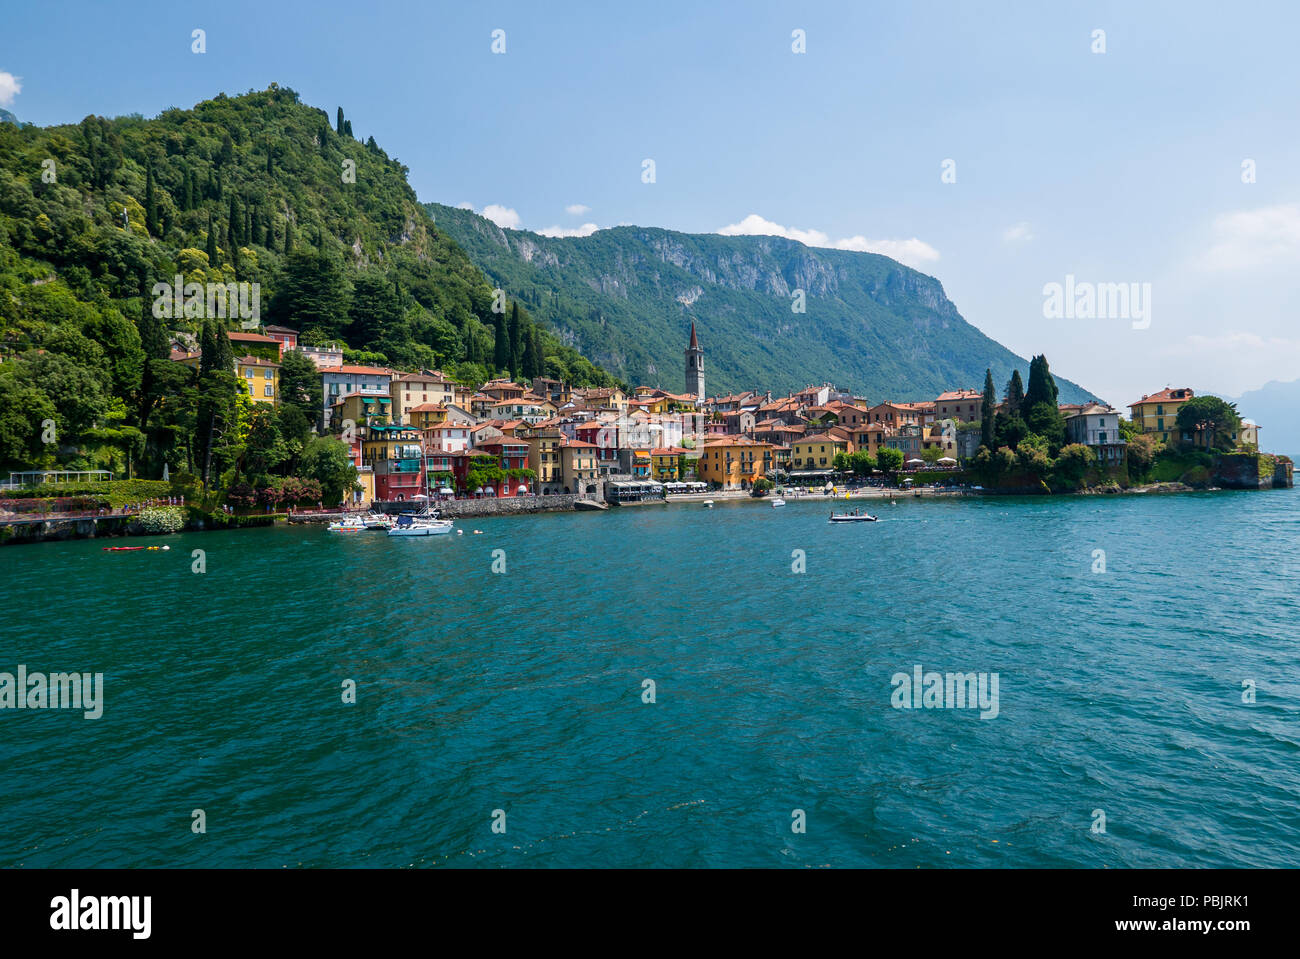 View of Varenna town one of the small beautiful towns on Como lake seen from ferry, Lombardy, Italy Stock Photo